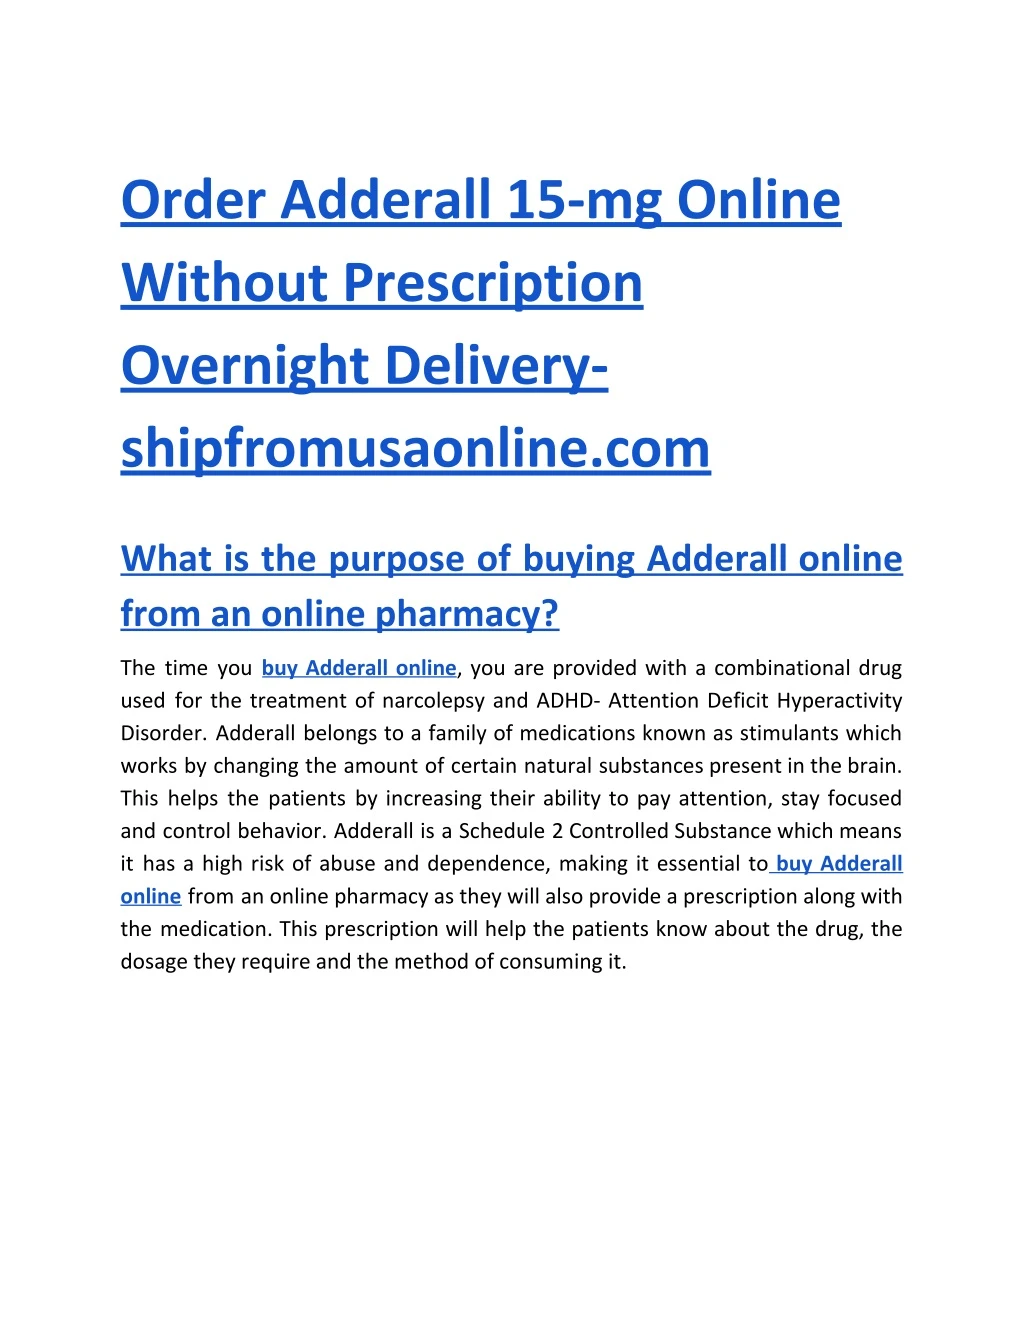 order adderall 15 mg online without prescription